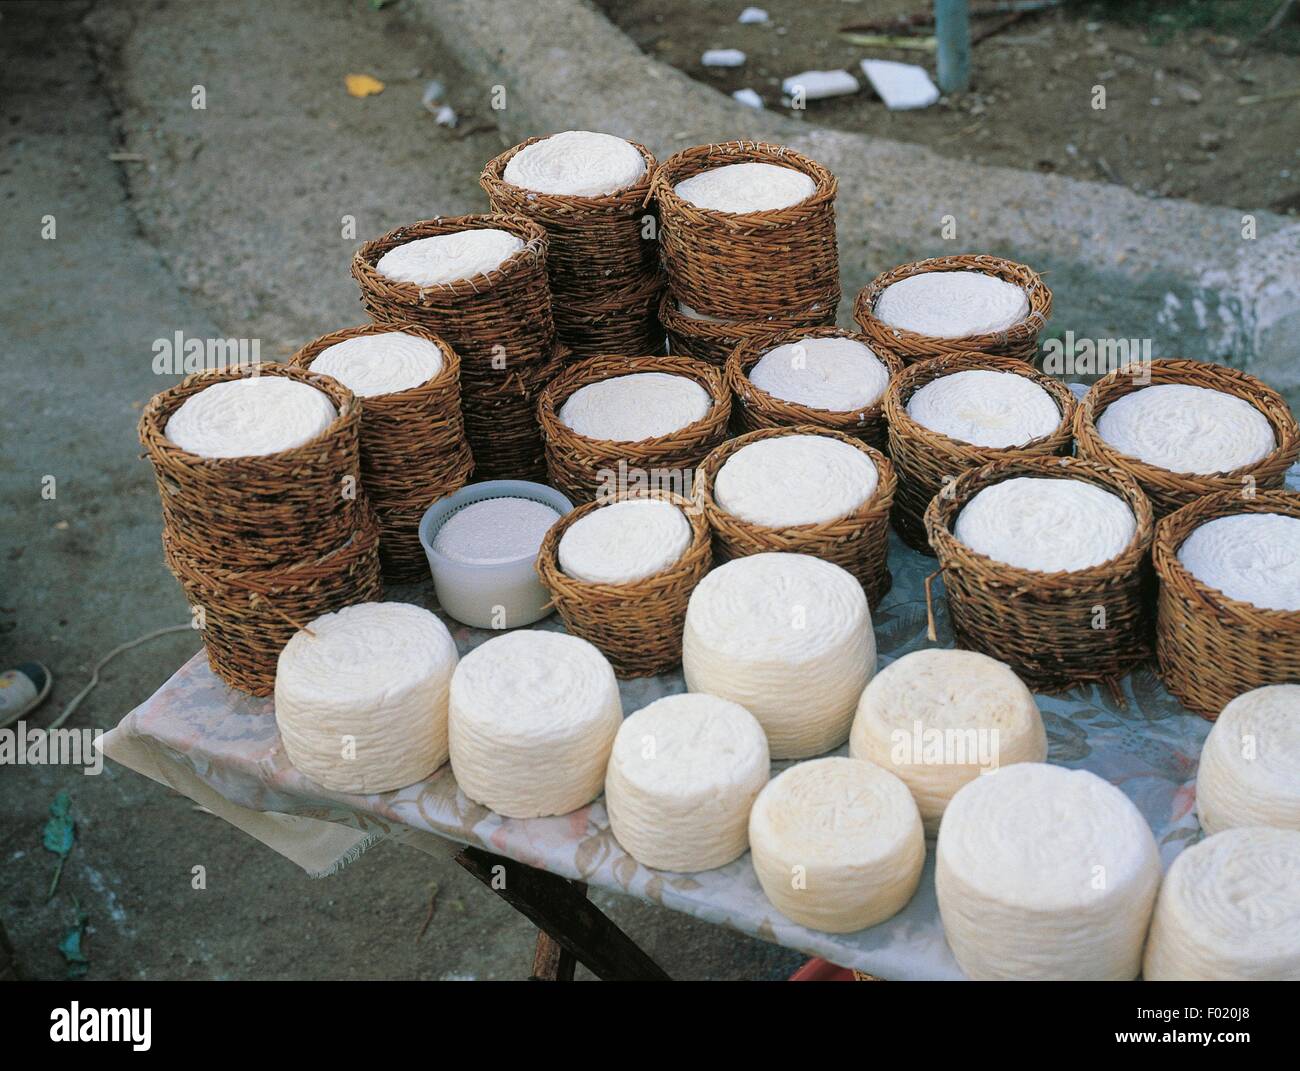 Selling cheeses, Molise, Italy. Stock Photo